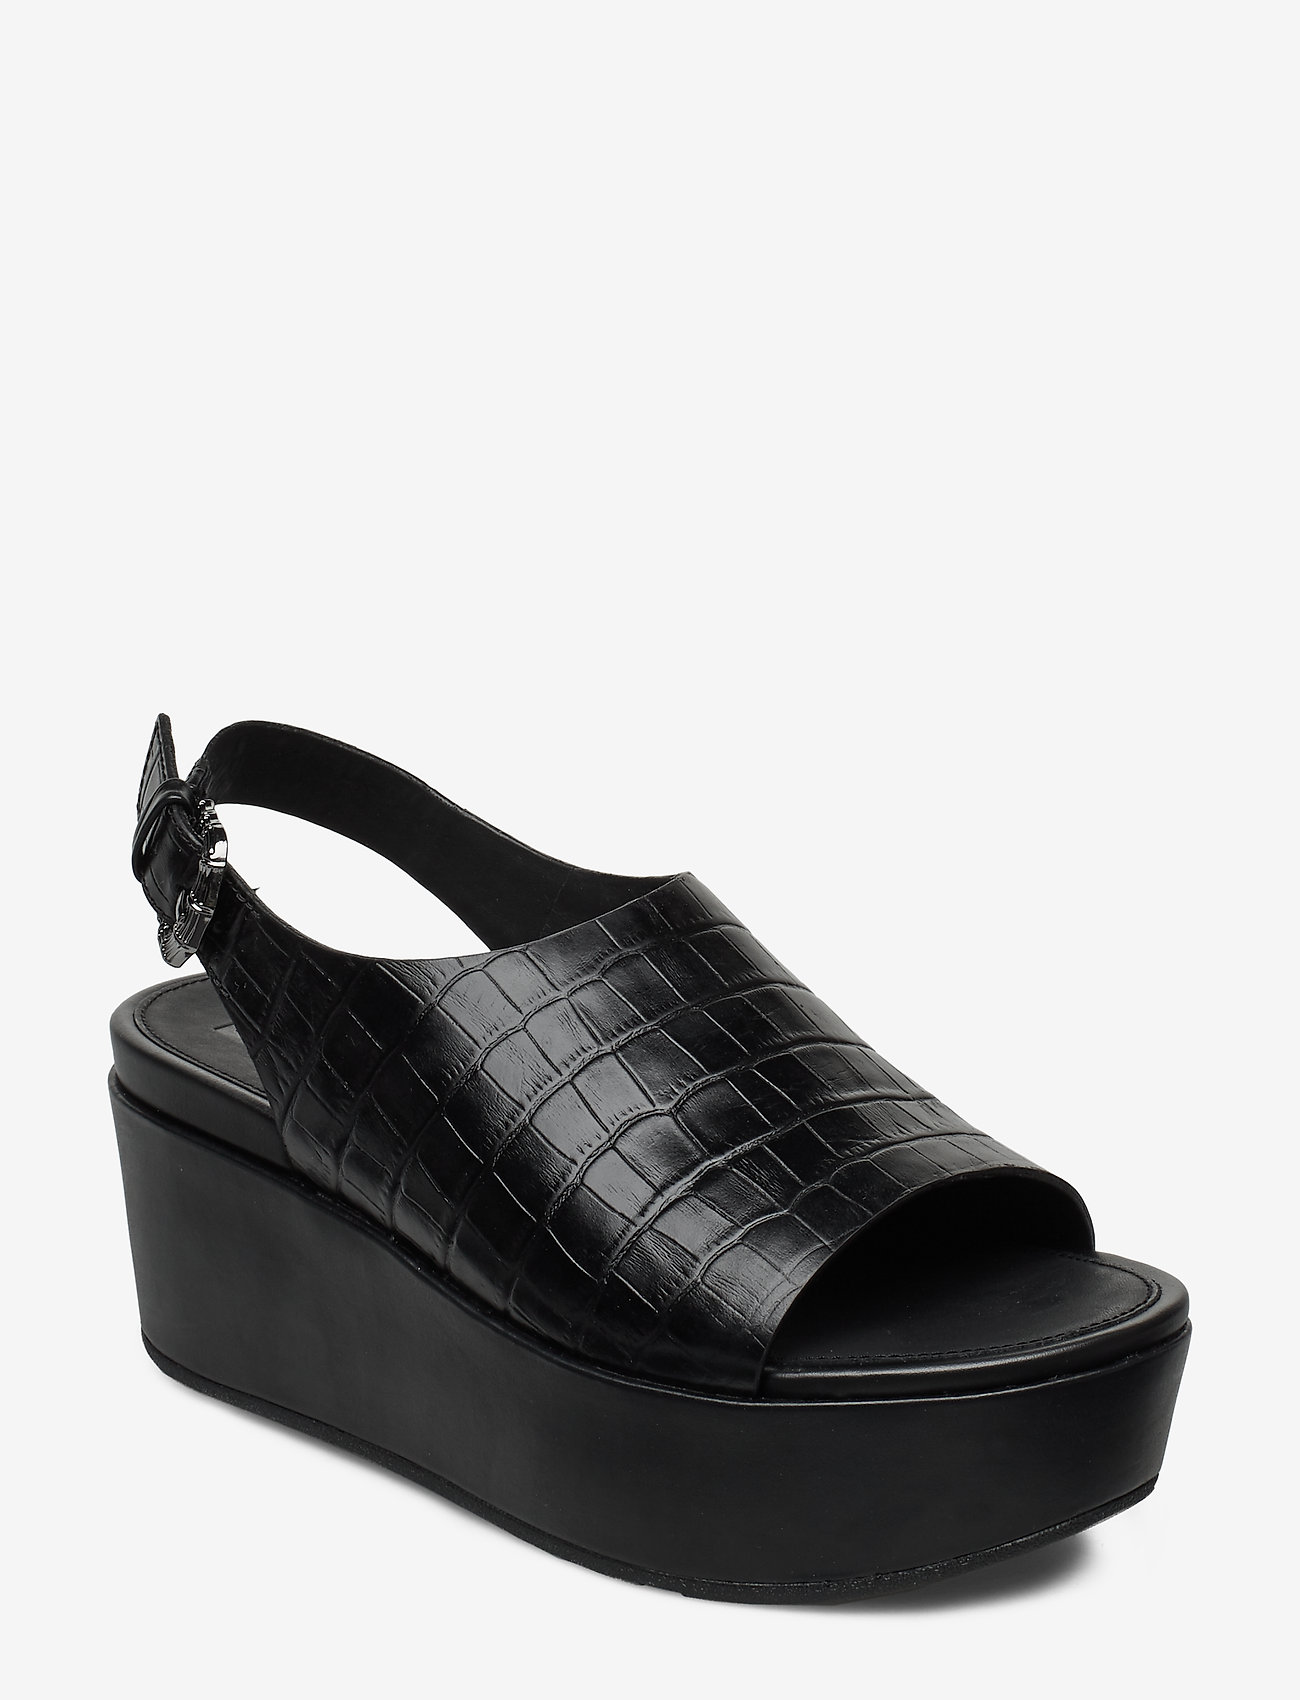 all black wedge shoes